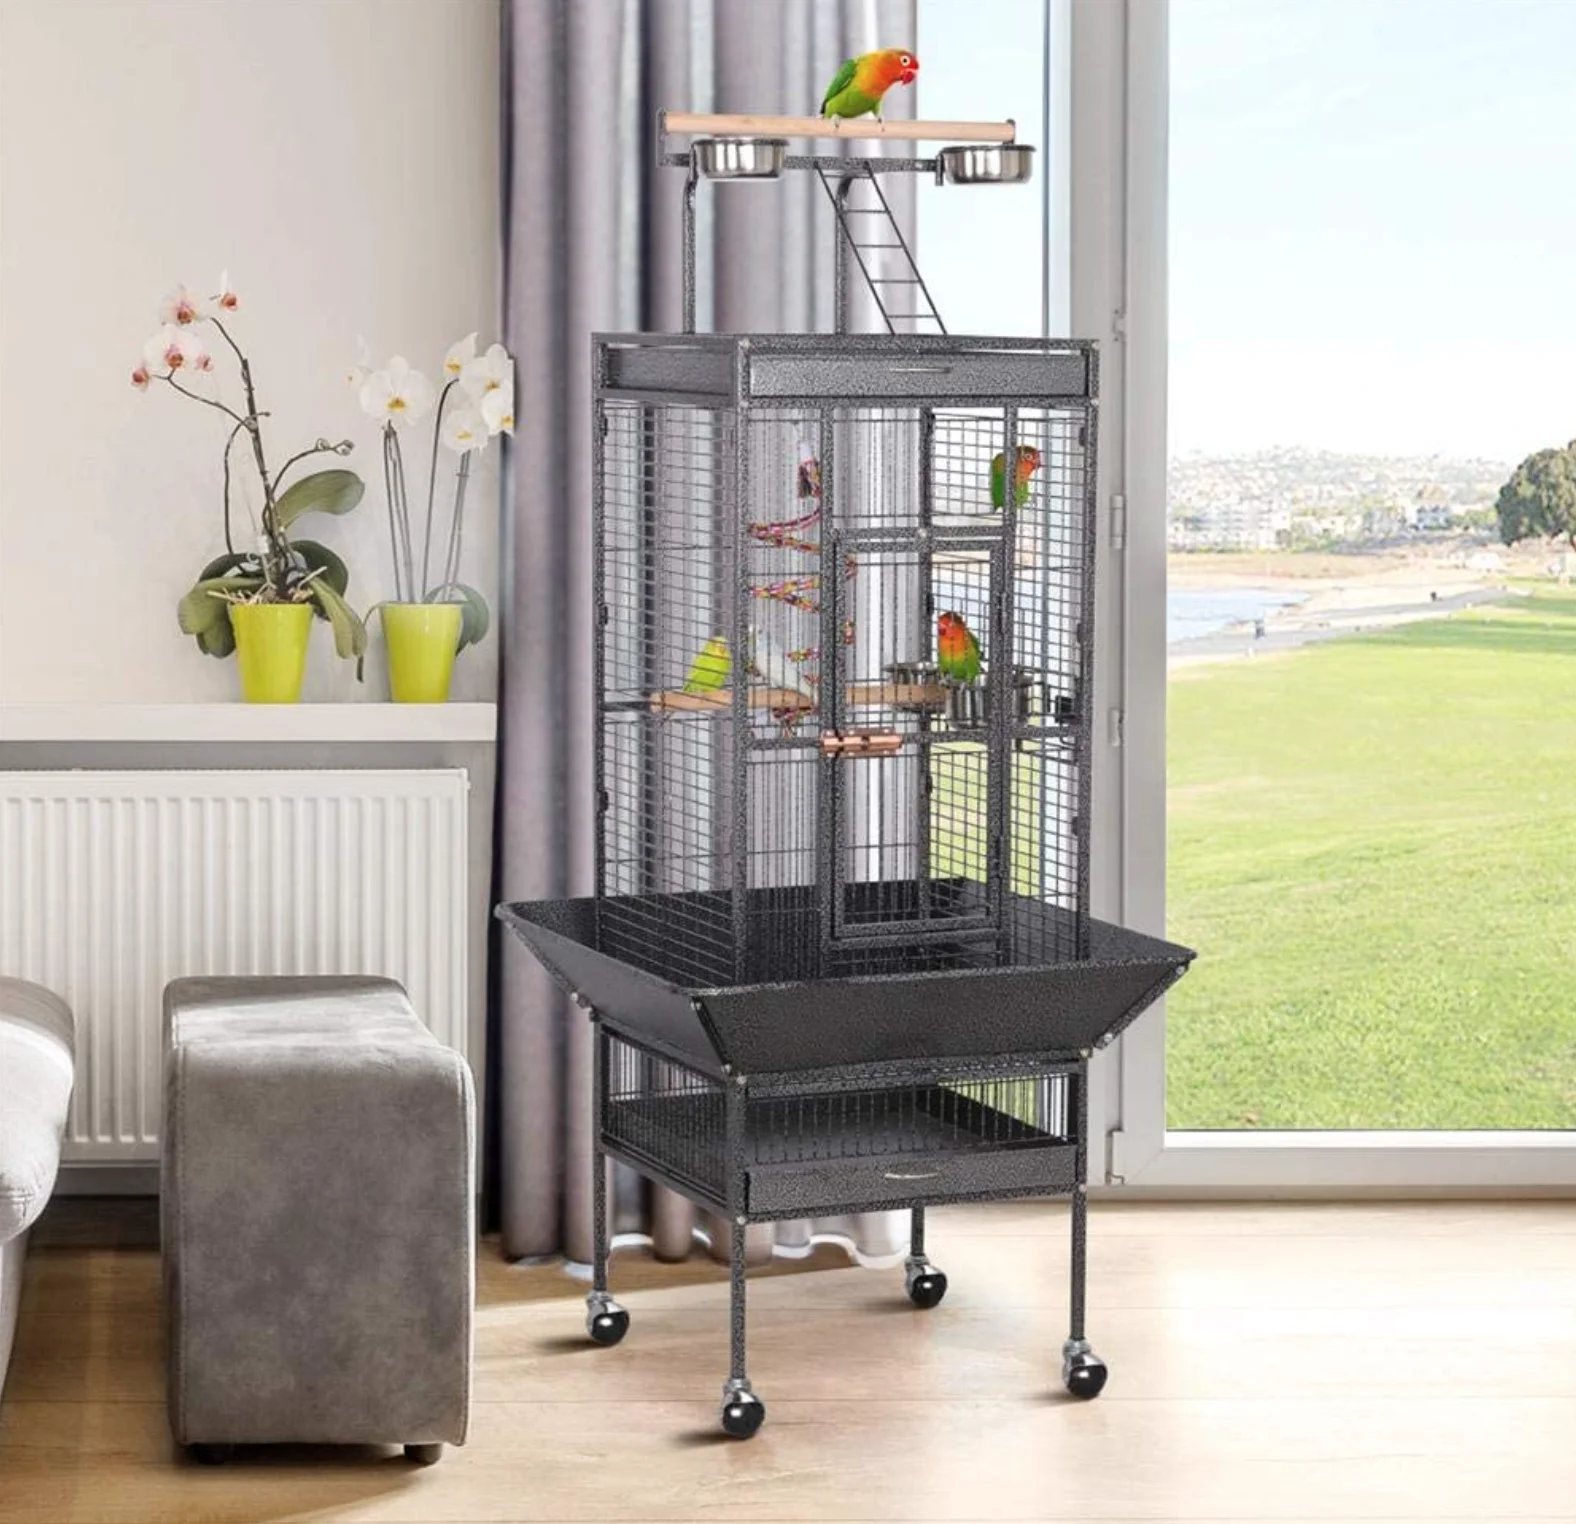 

Stainless bird cage with wheels classics big parrot canary bird cage for sale, Black or customized